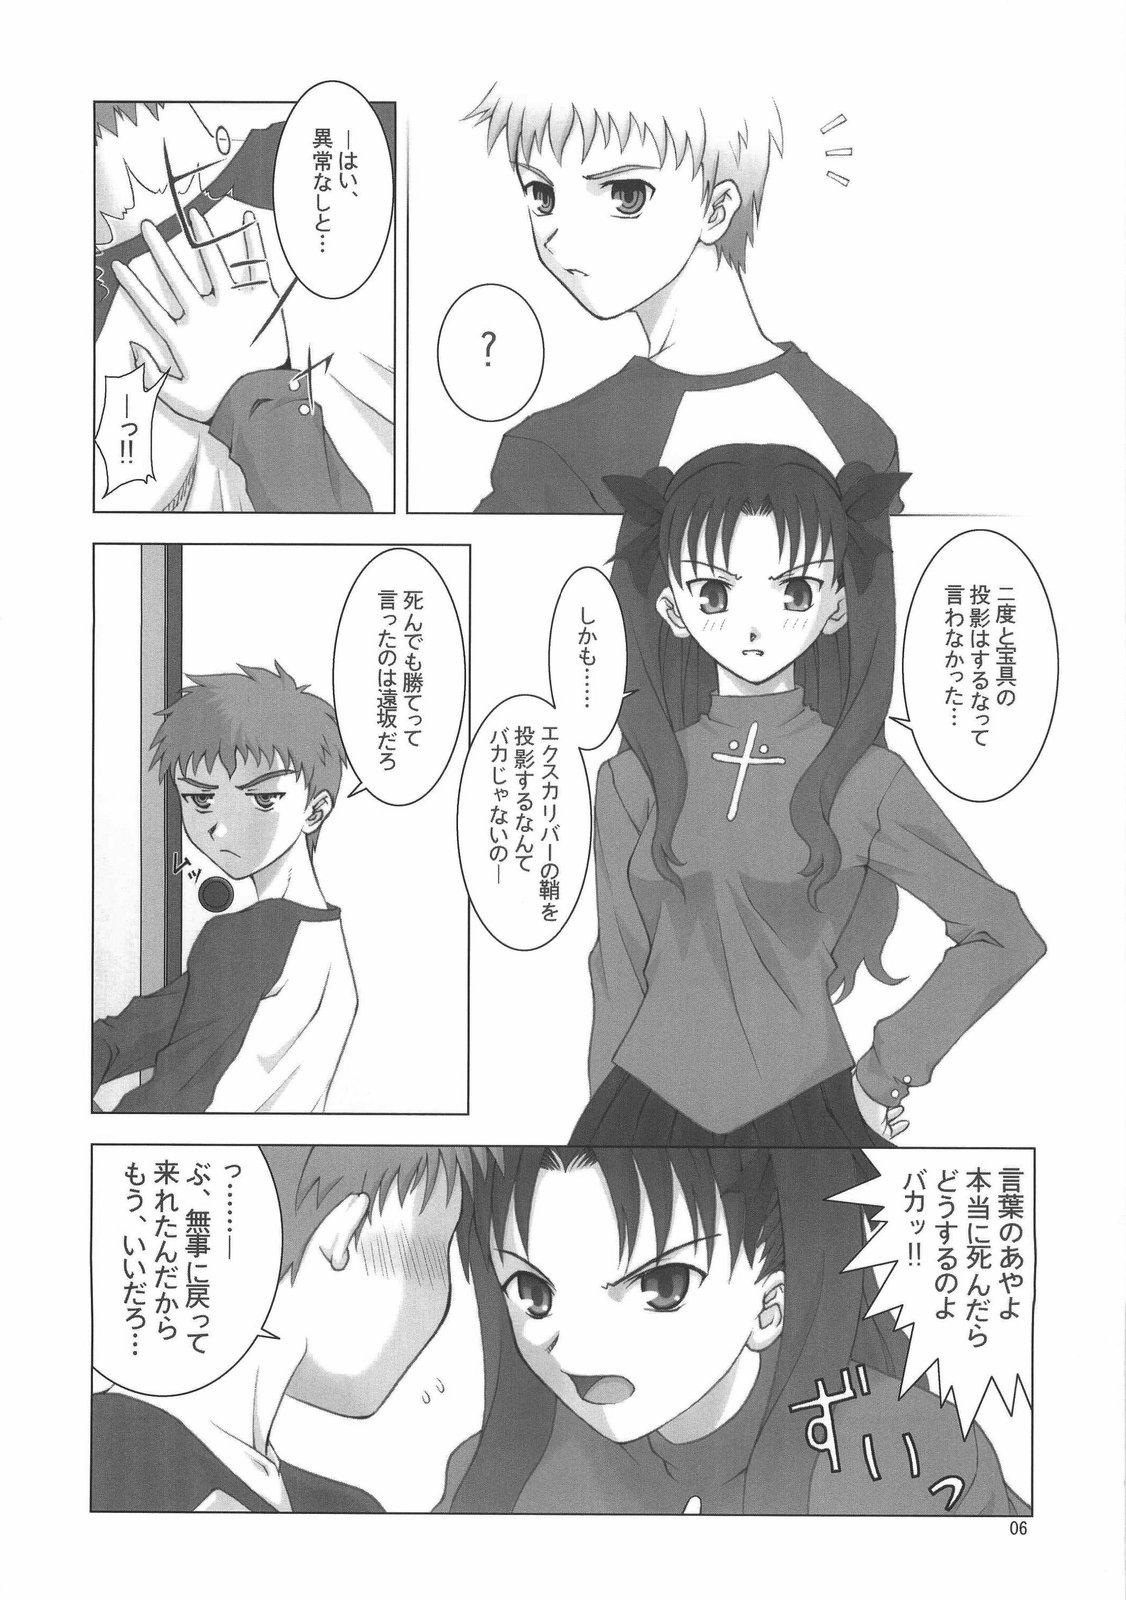 Masterbate R25 Vol.9 Unlimited/fotune - Fate stay night Pick Up - Page 5